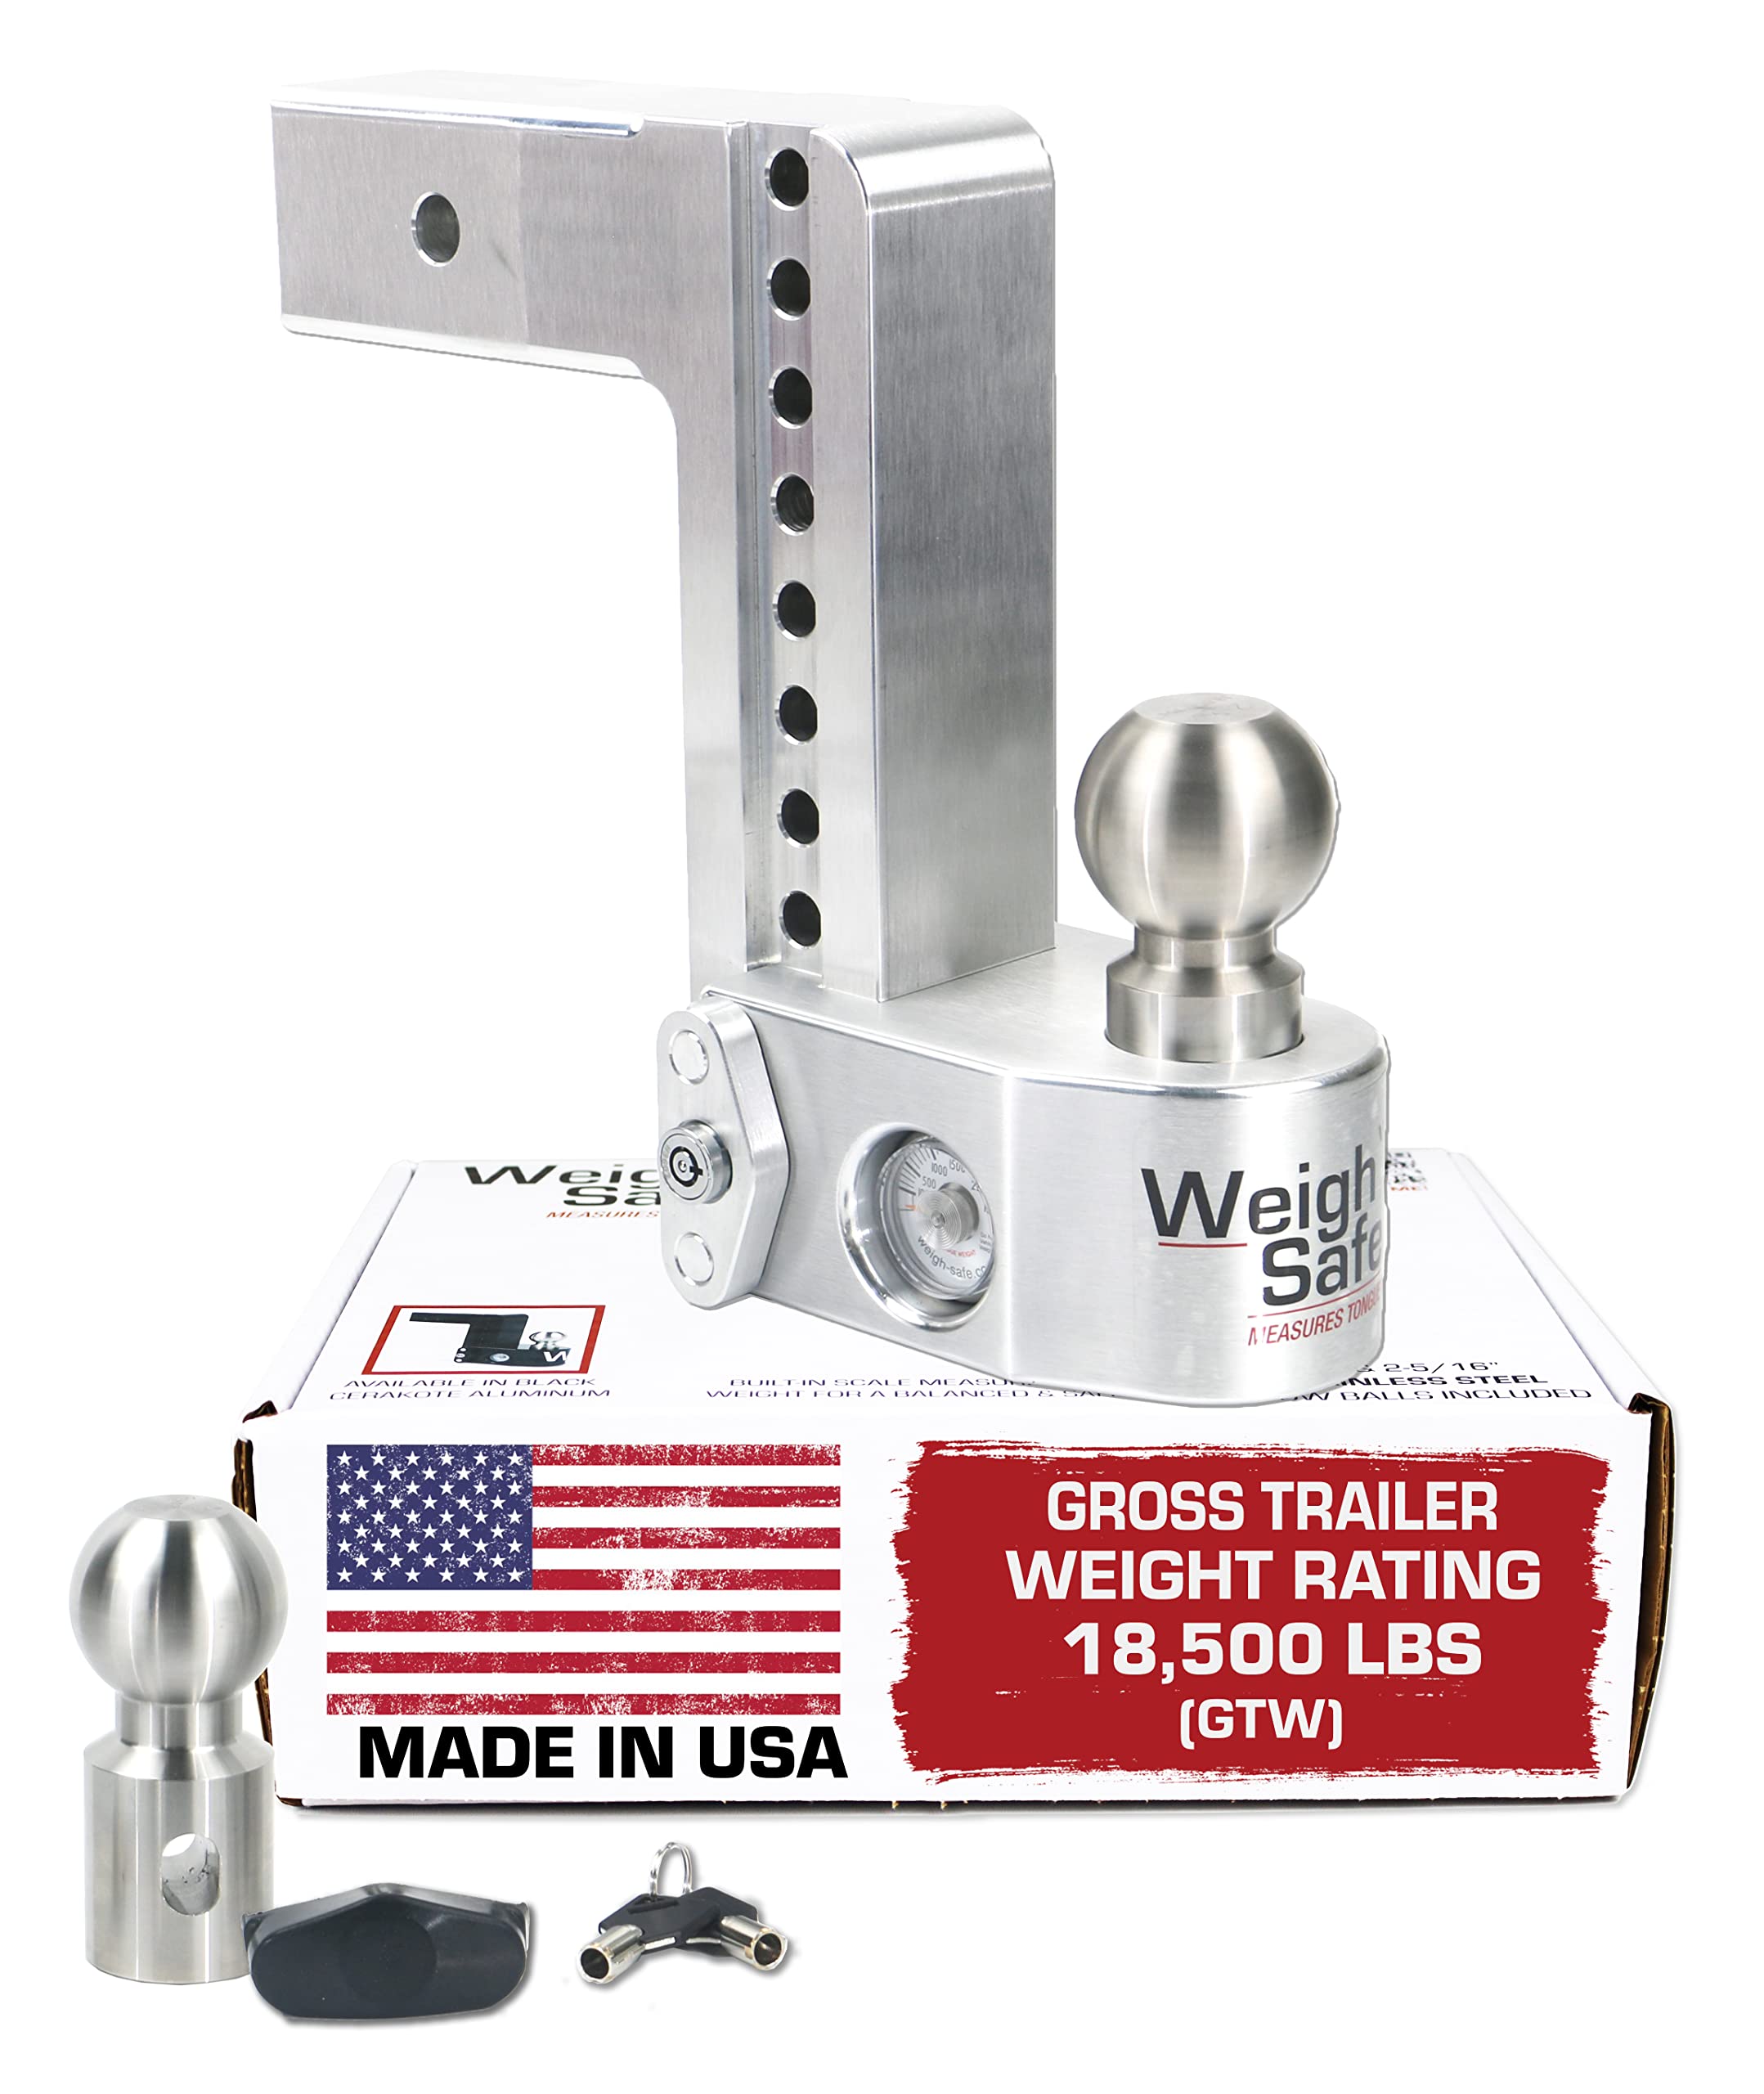 Weigh Safe Adjustable Trailer Hitch Ball Mount - 8" Adjustable Drop Hitch for 2.5" Receiver - Premium Heavy Duty Aluminum Traile